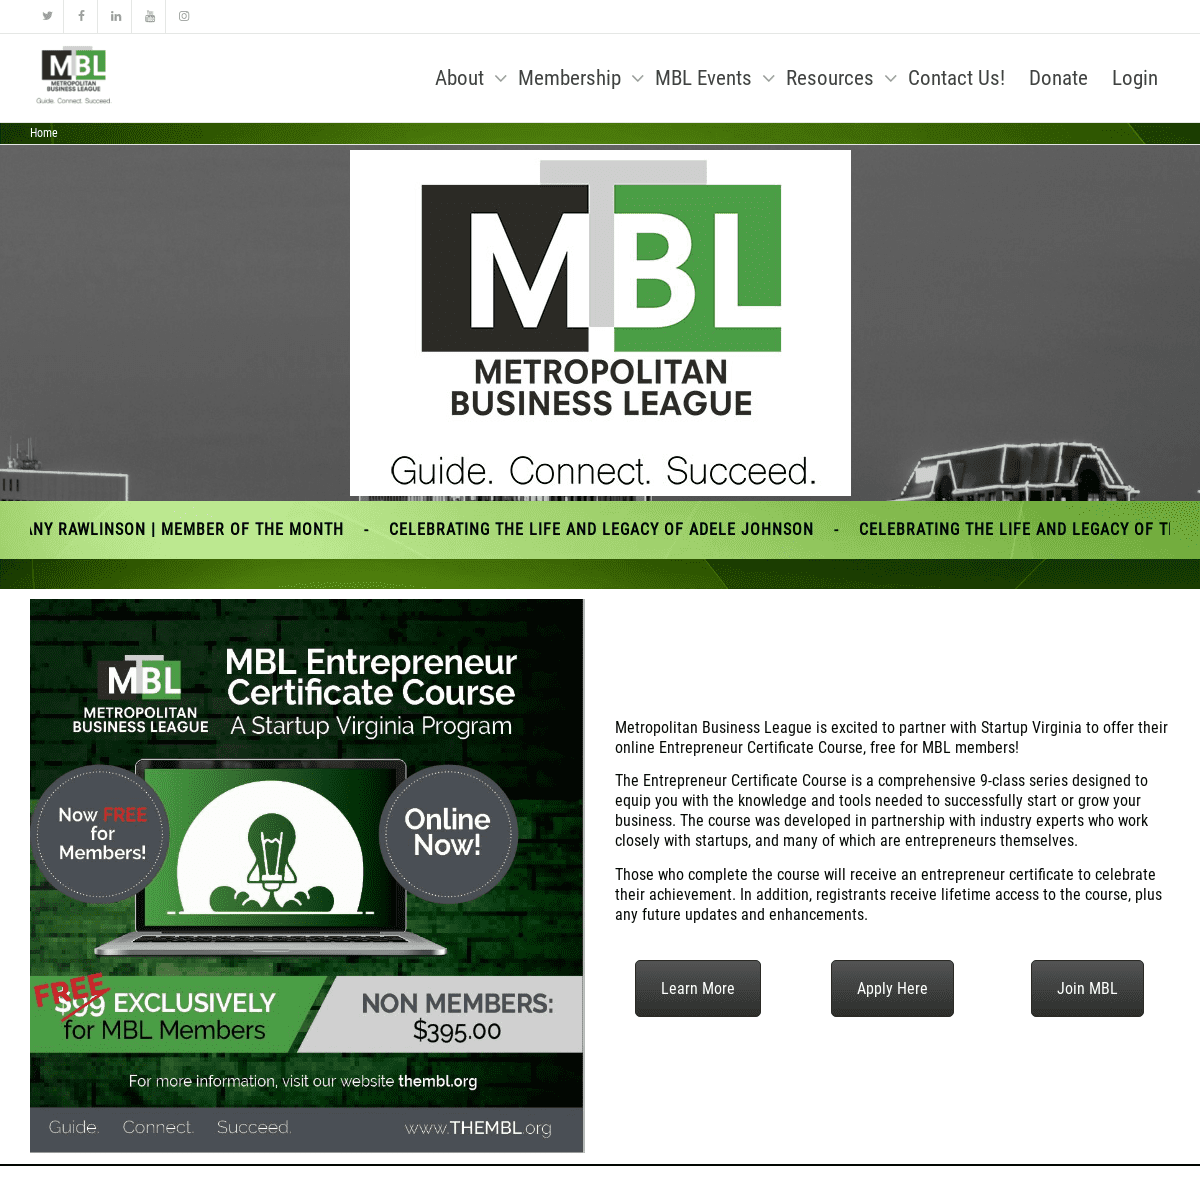 A complete backup of https://thembl.org